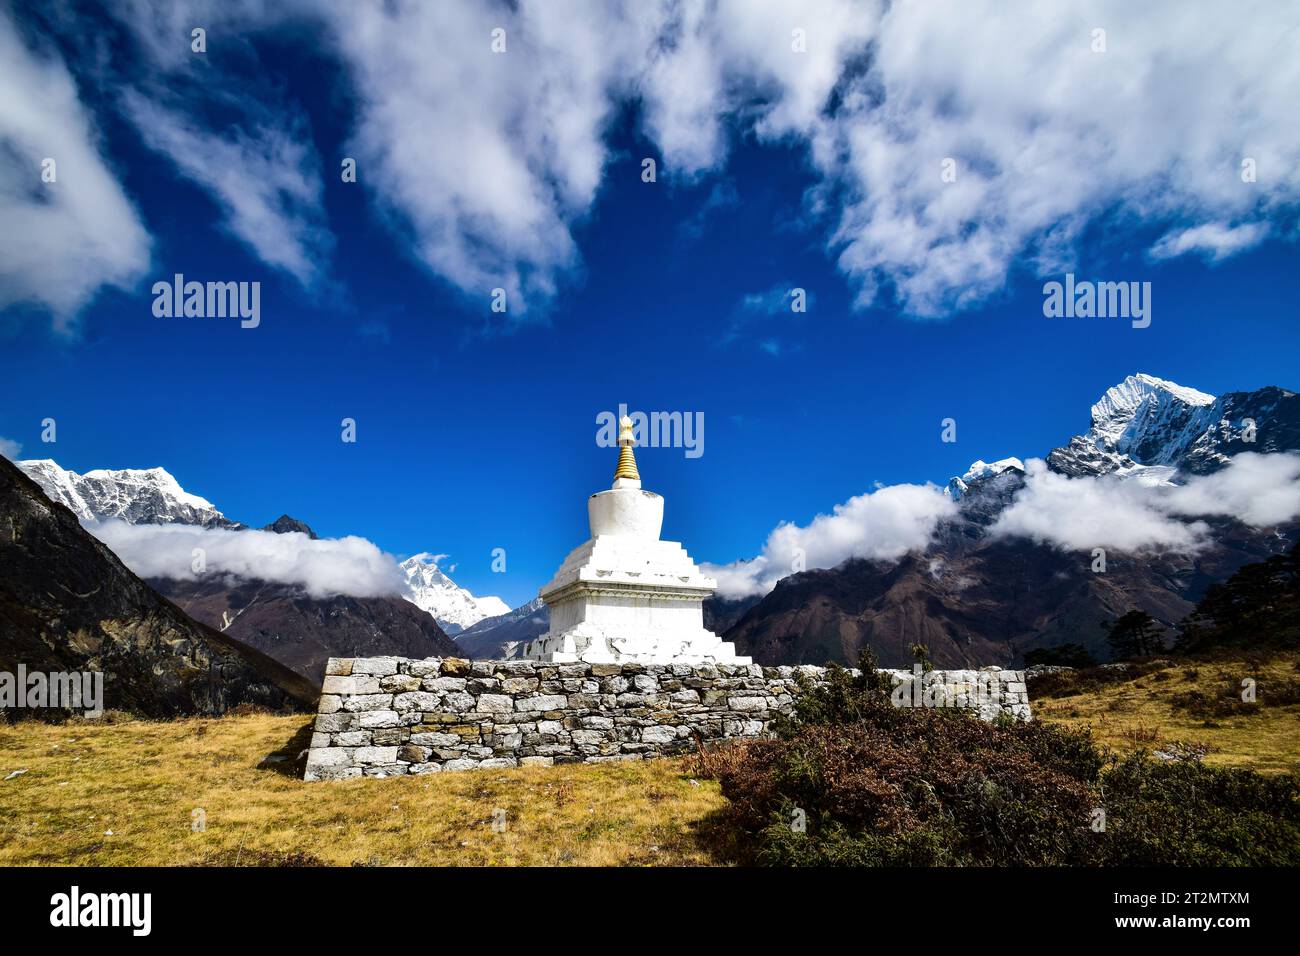 Chorten with Ama Dablam and Mount Everest in the background Stock Photo